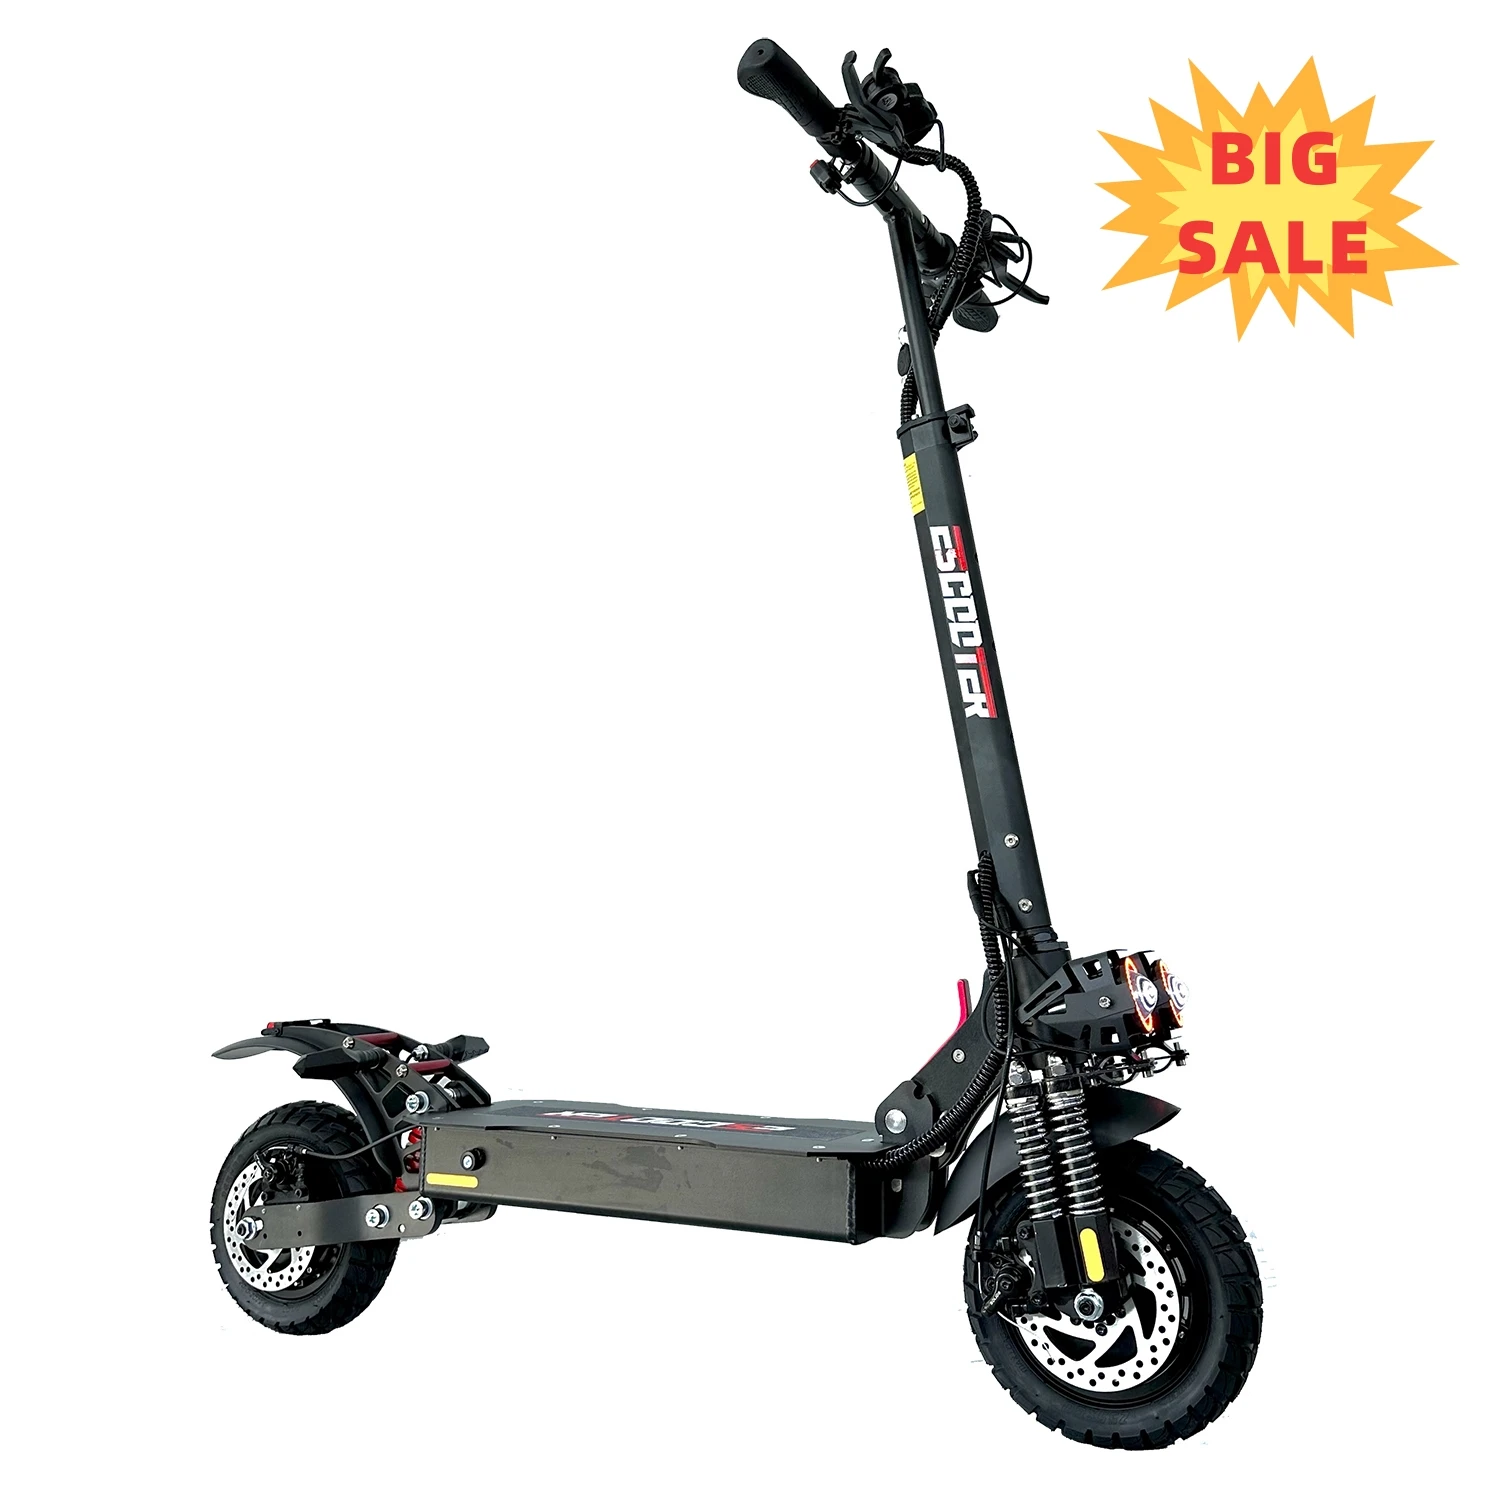 

USA warehouse stock Dual motor E Scooter 48v 1200w 2400w 10inch 55km/h Electric Scooter locks key 150kg max load